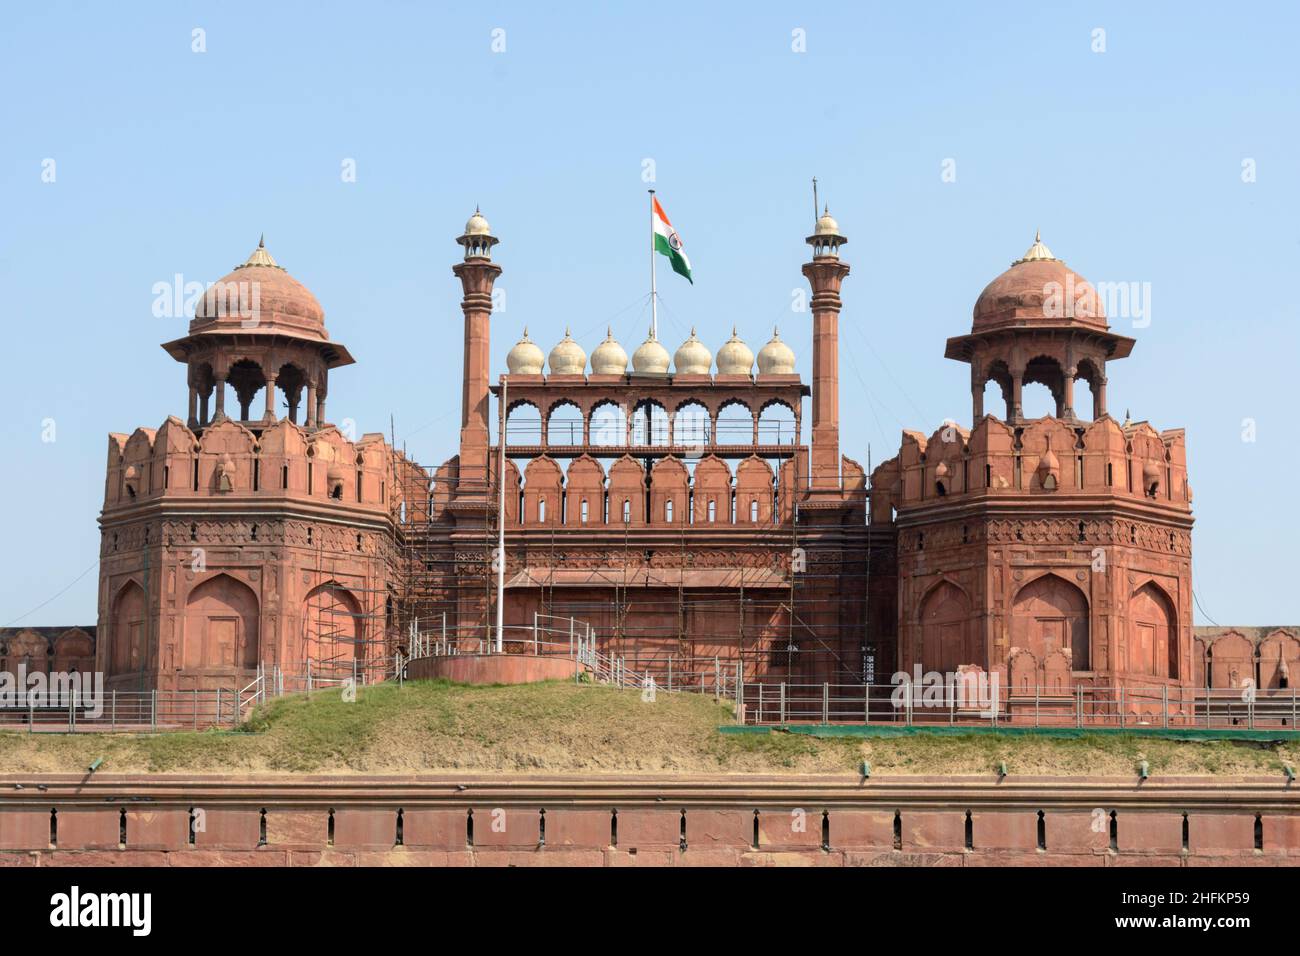 The Red Fort (Lal Qila), Old Delhi, India, South Asia Stock Photo